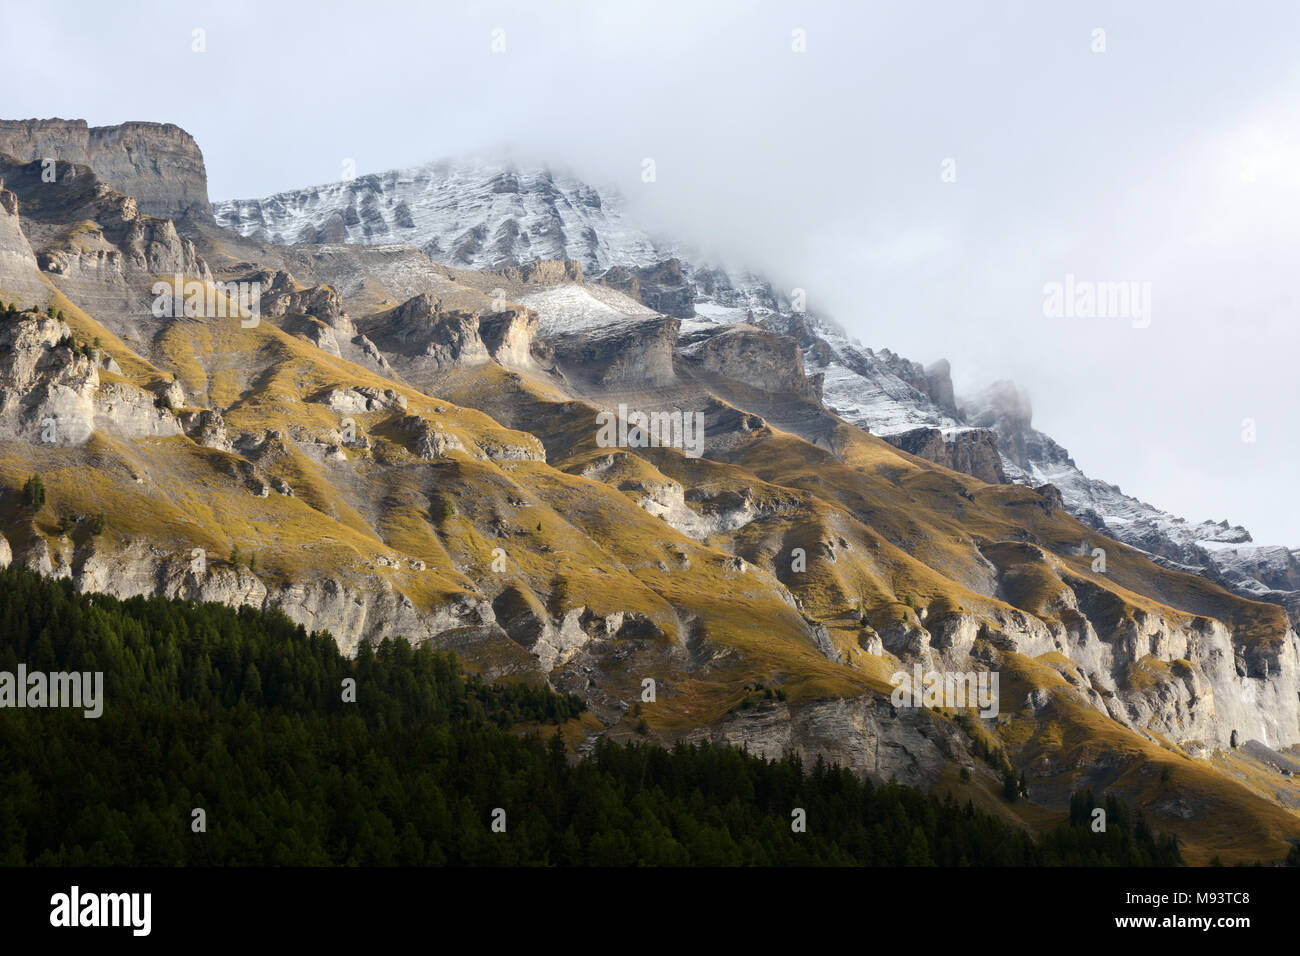 Rinderhorn and the mountains of the Gemmi Pass in the Bernese Alps overlooking the Swiss alpine resort town of Leukerbad, Valais canton, Switzerland. Stock Photo